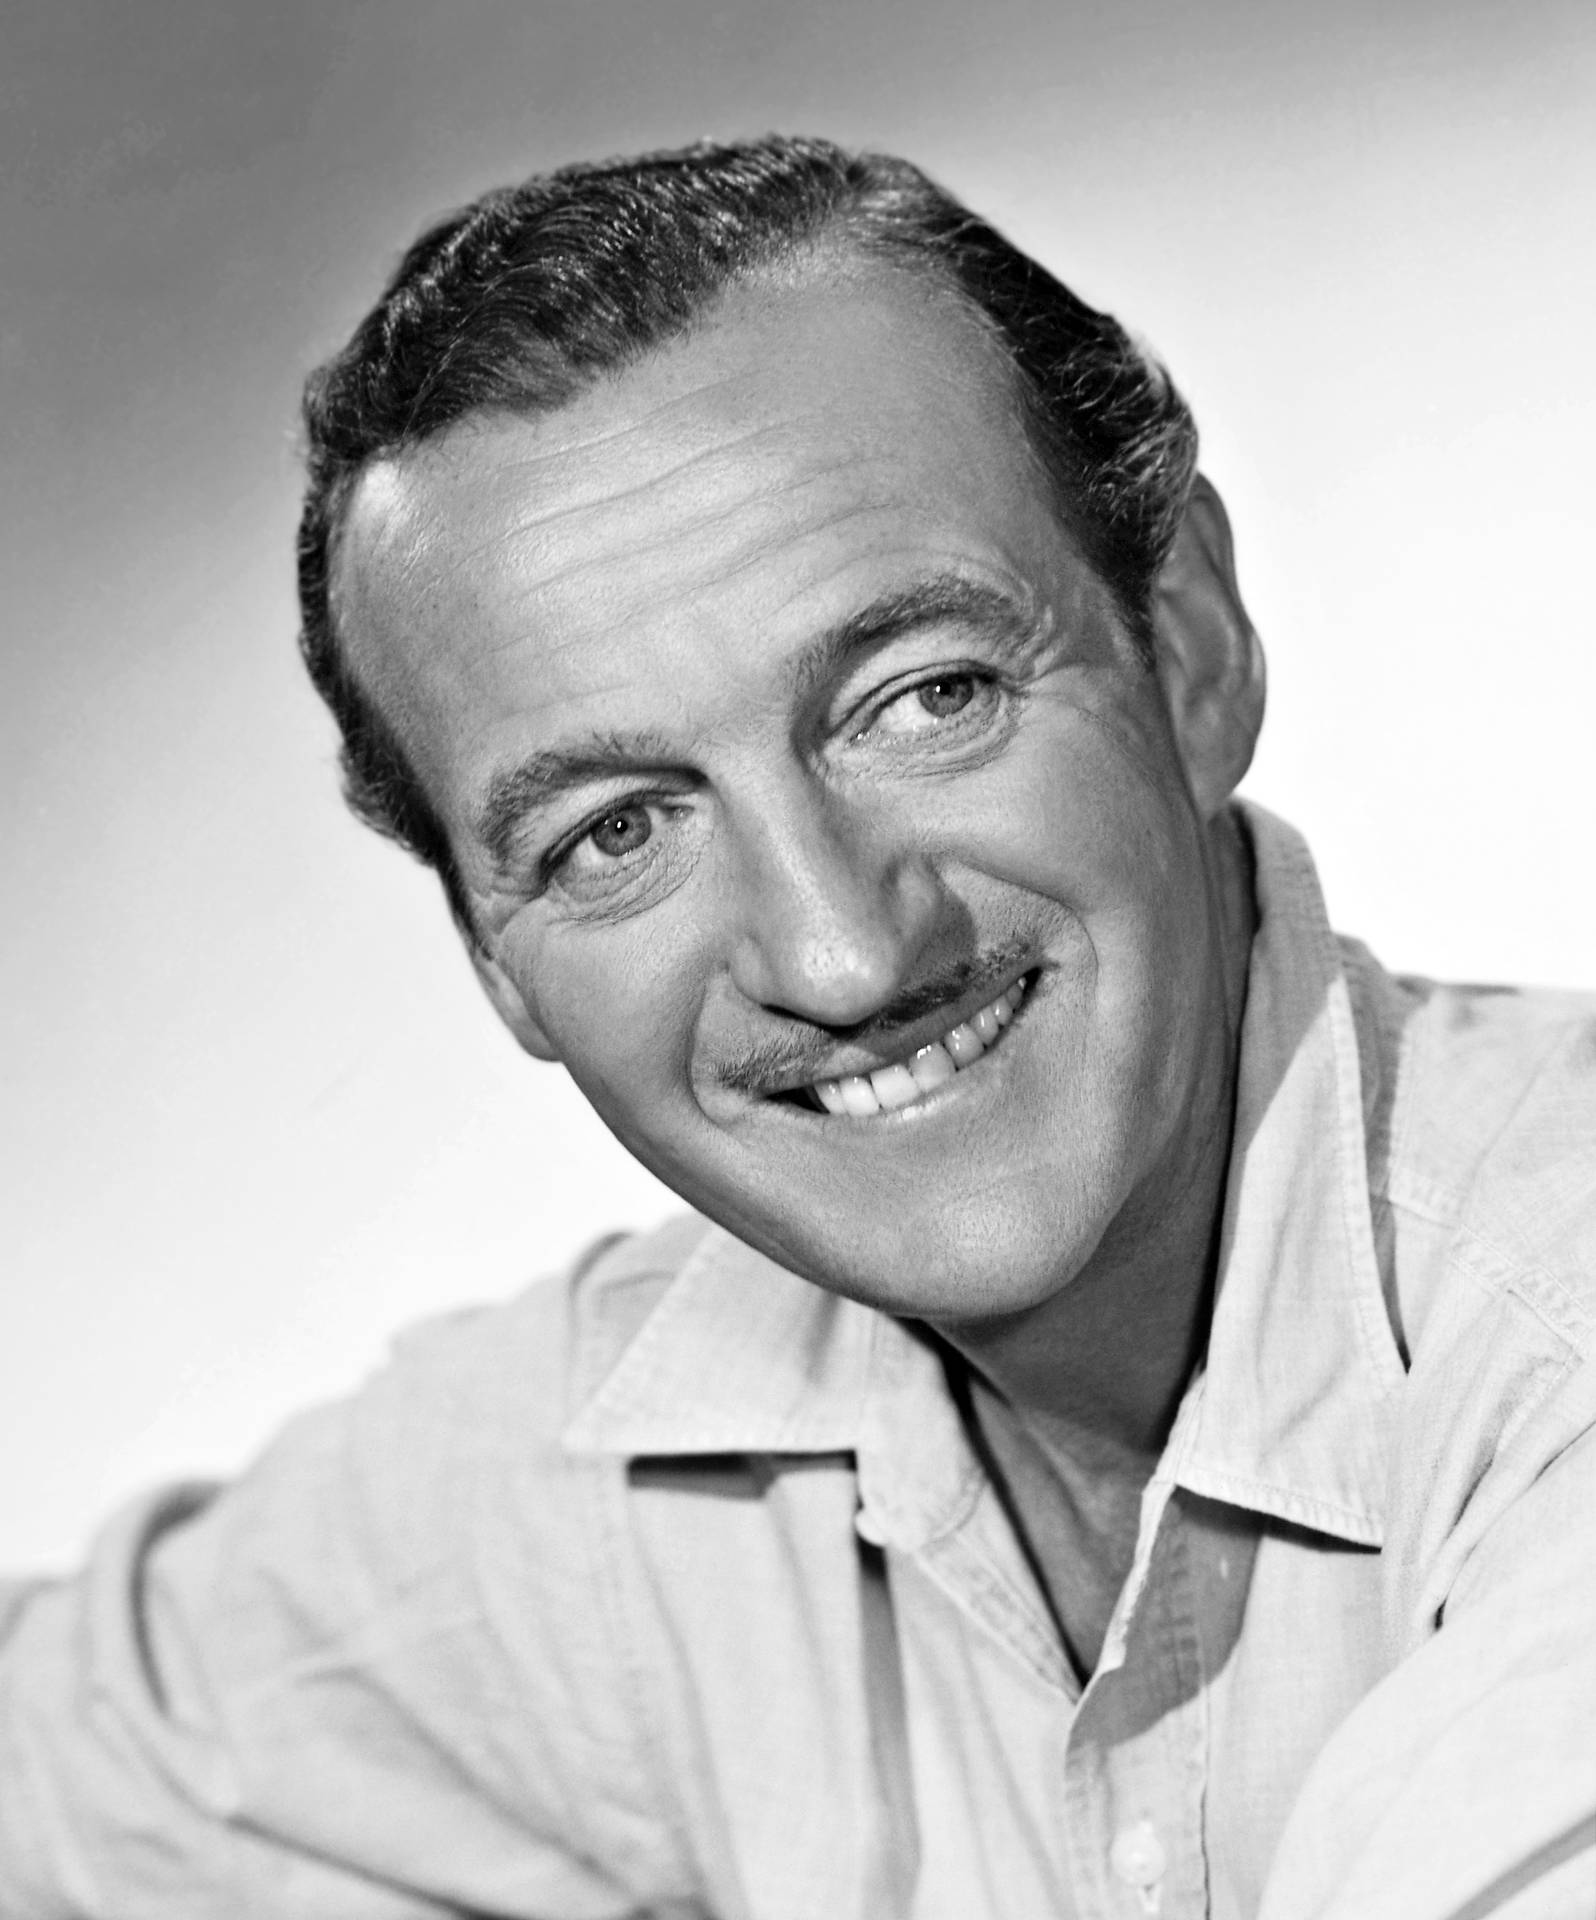 Davidniven – Leende Brittisk Skådespelare. (this Can Be Used As A Title For A Wallpaper Featuring David Niven's Smiling Photo) Wallpaper